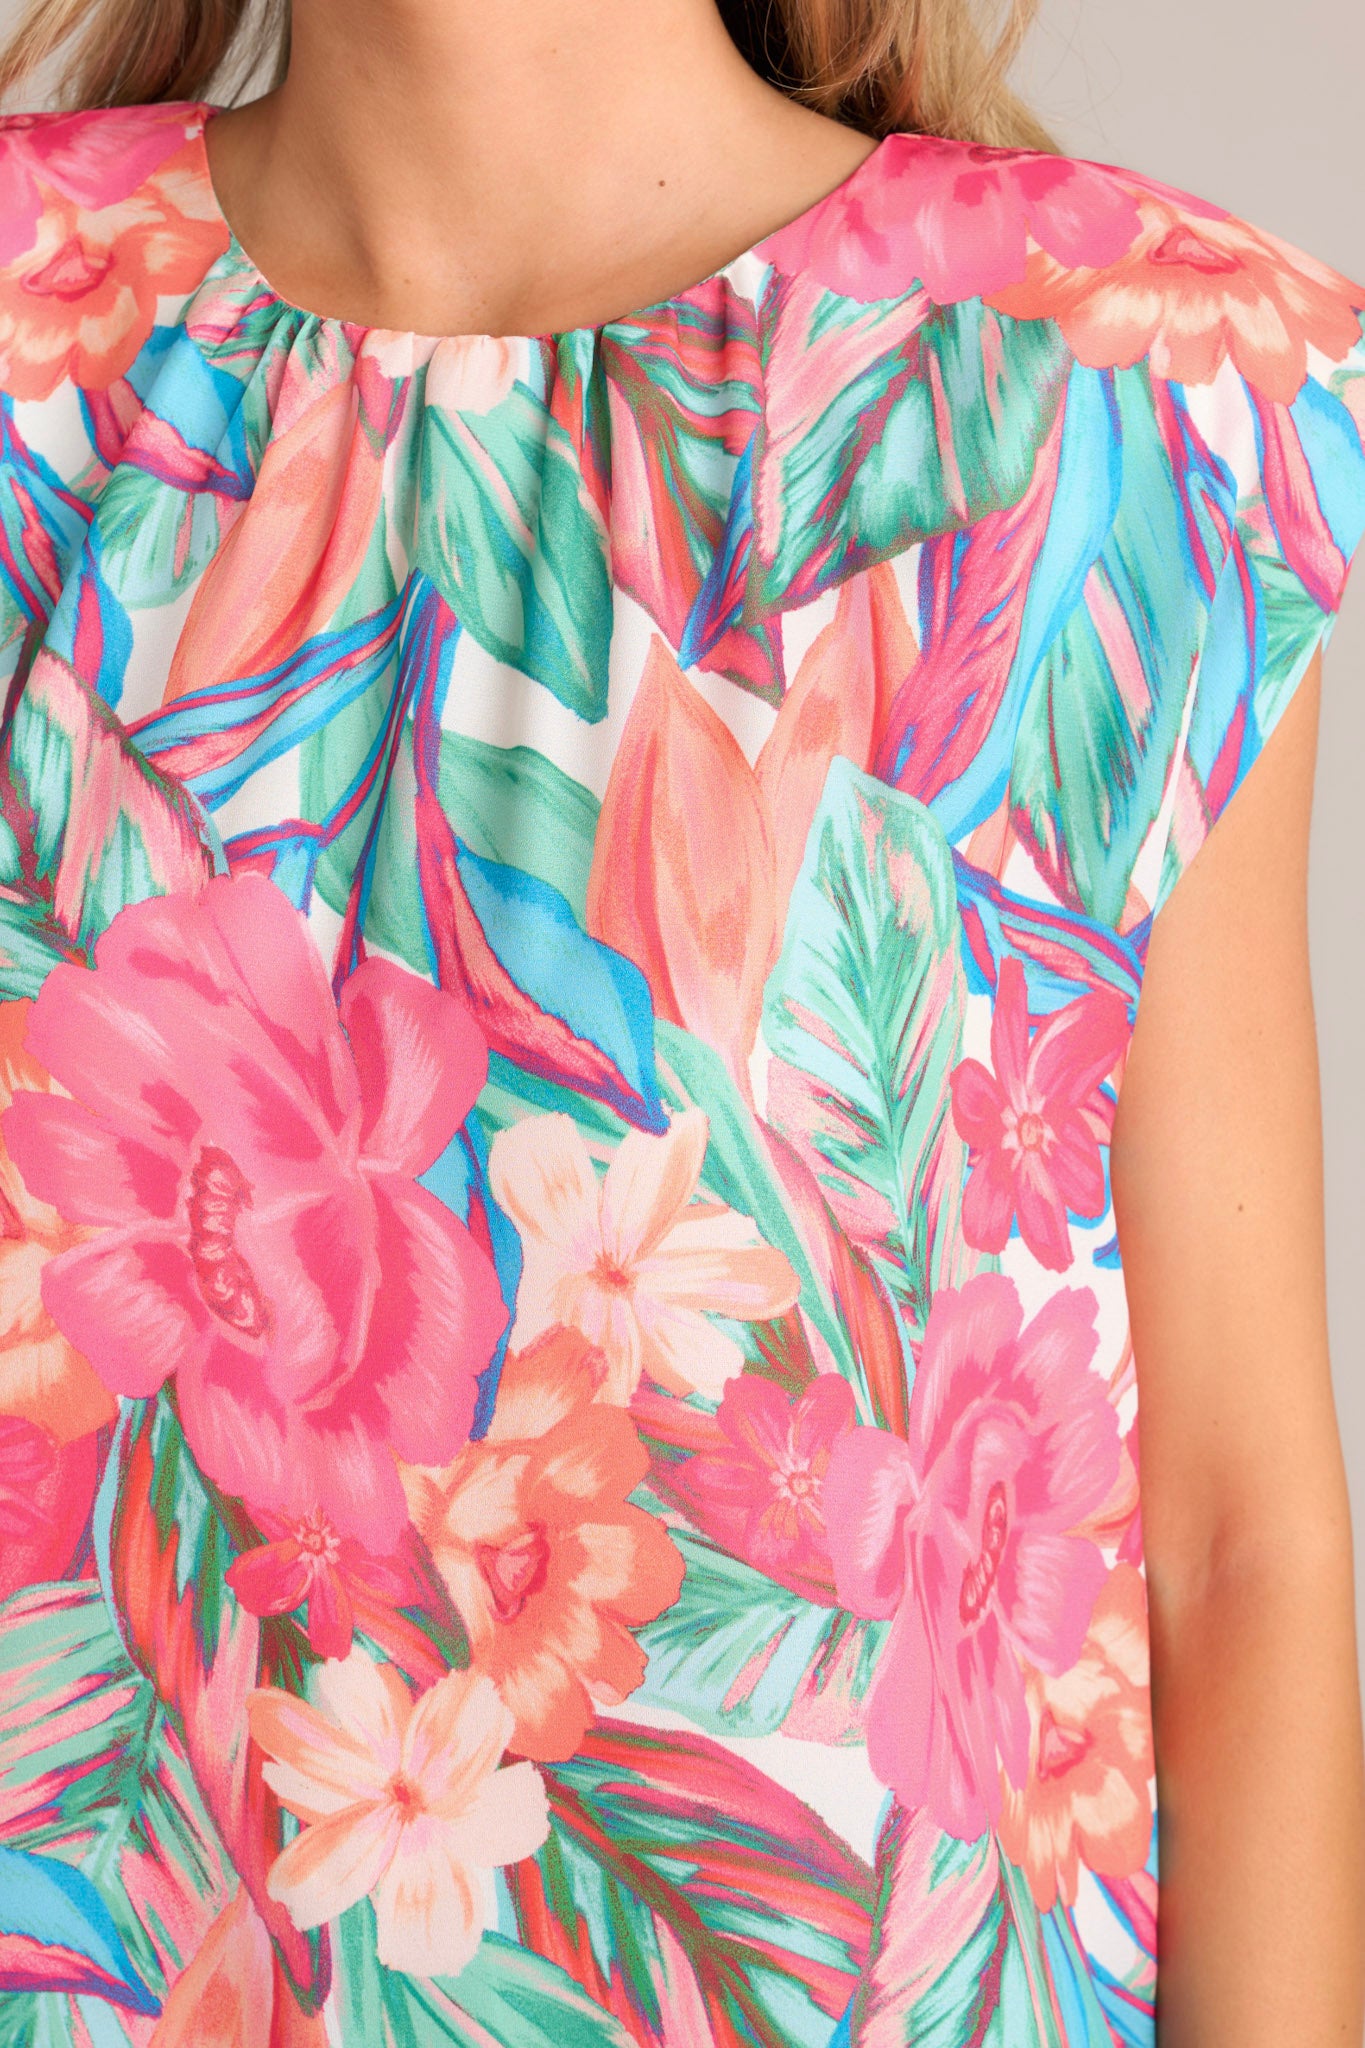 Close up view of this hot pink floral top that features a crew neckline, shoulder padding, wide short sleeves, and a tropical floral print.